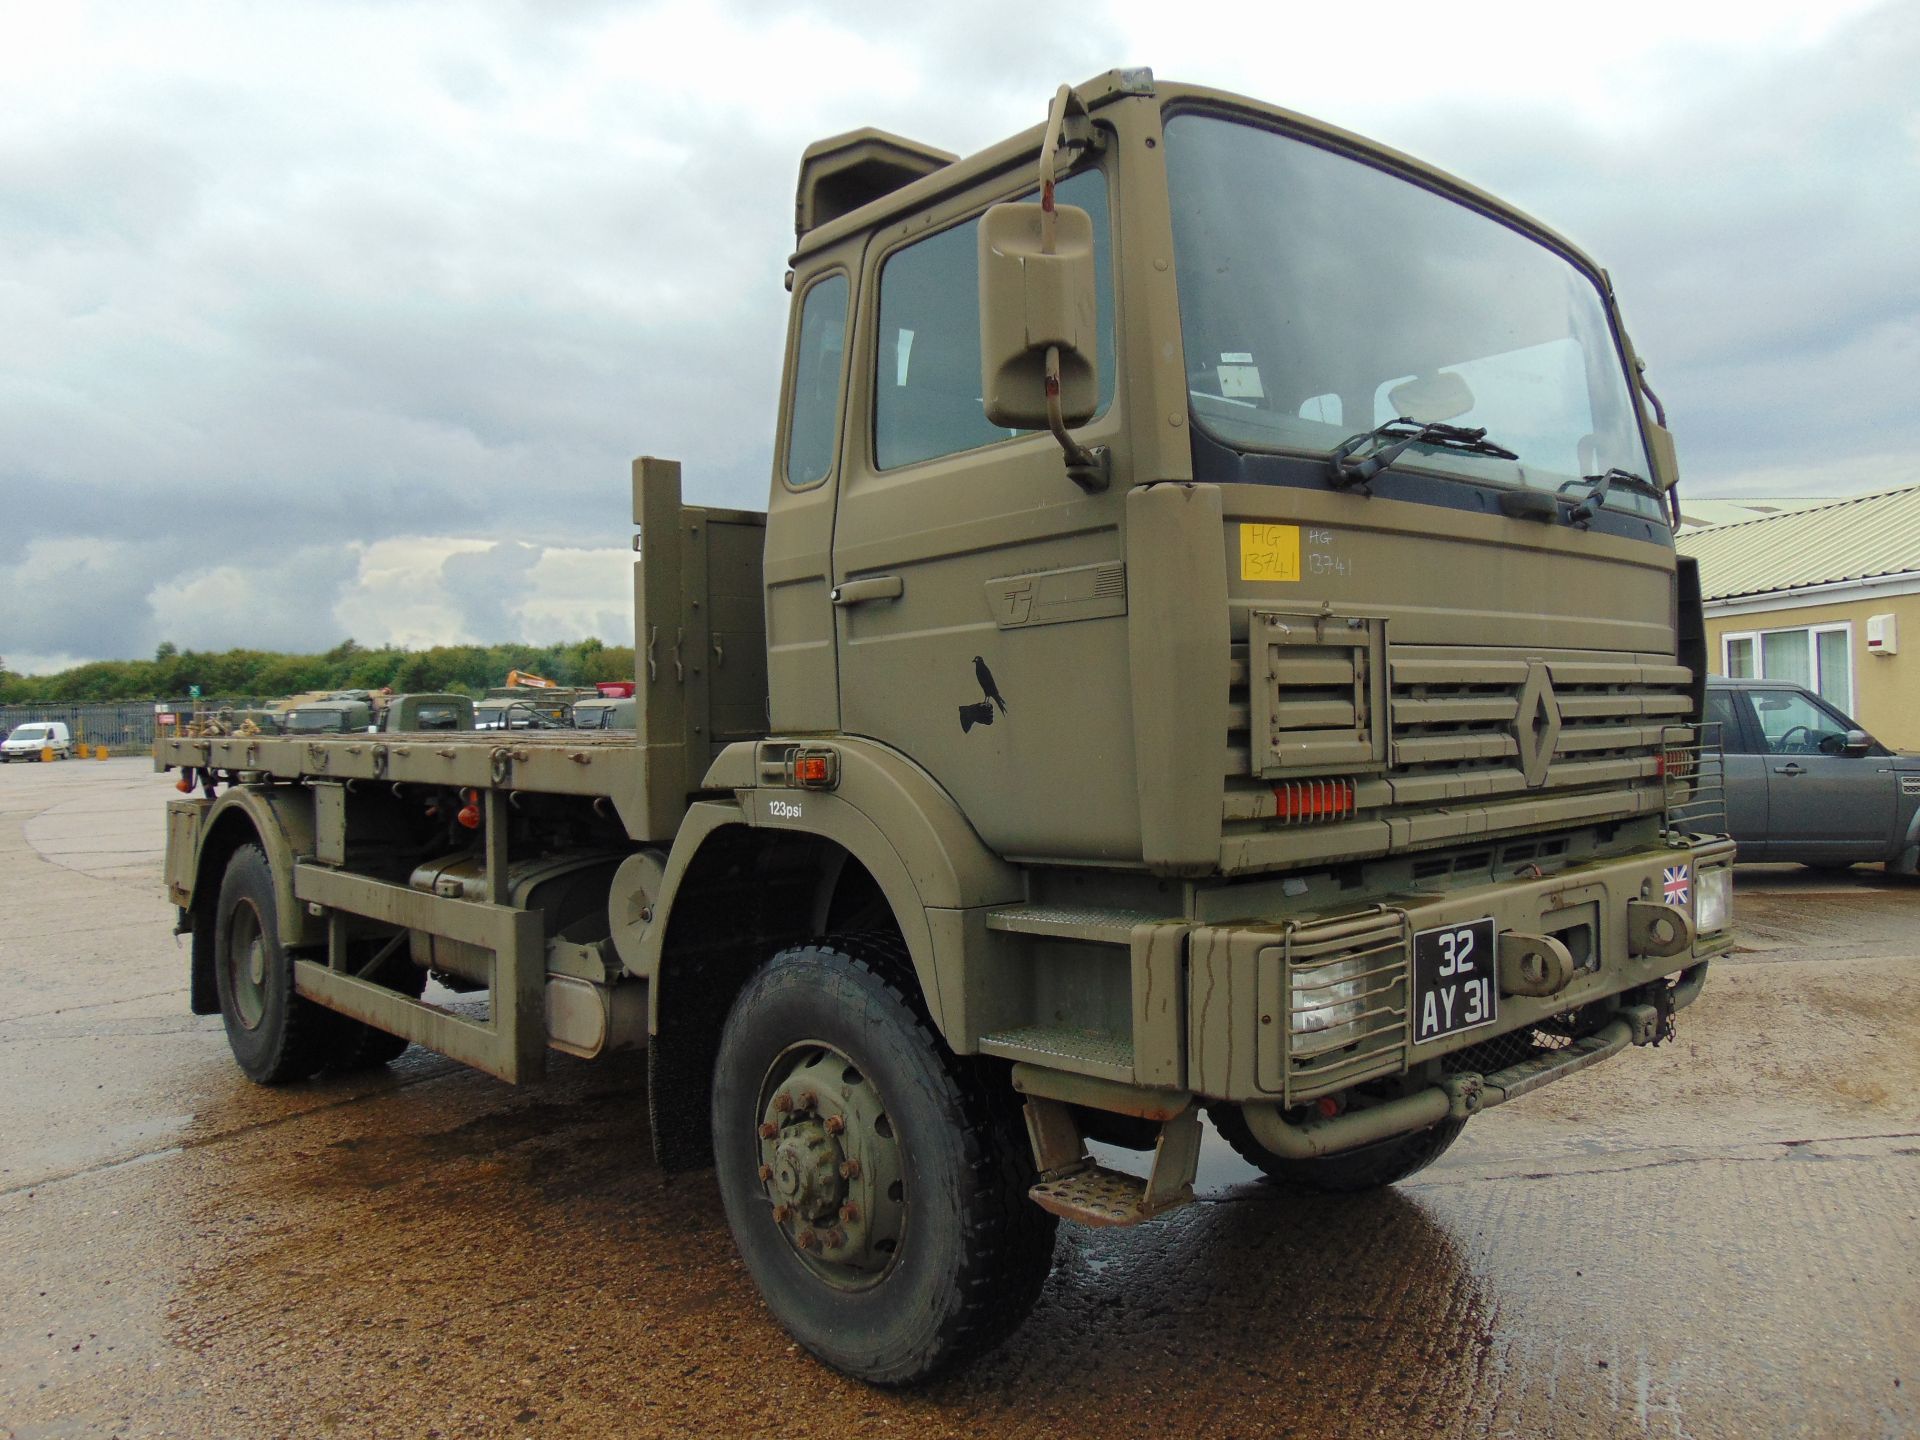 Renault G300 Maxter RHD 4x4 8T Cargo Truck complete with winch